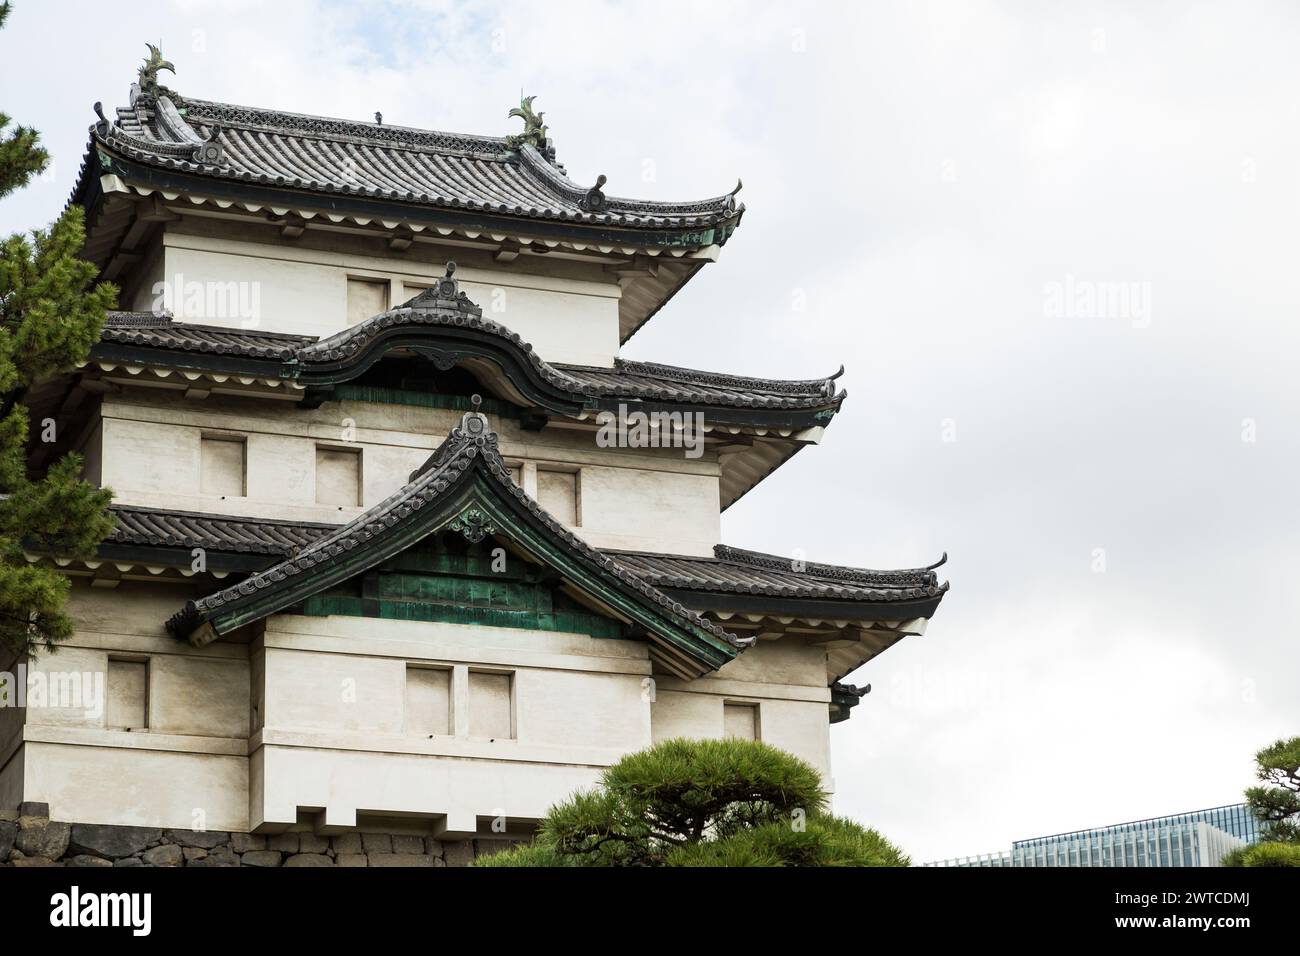 The Imperial Palace Tower in Tokyo Japan Stock Photo